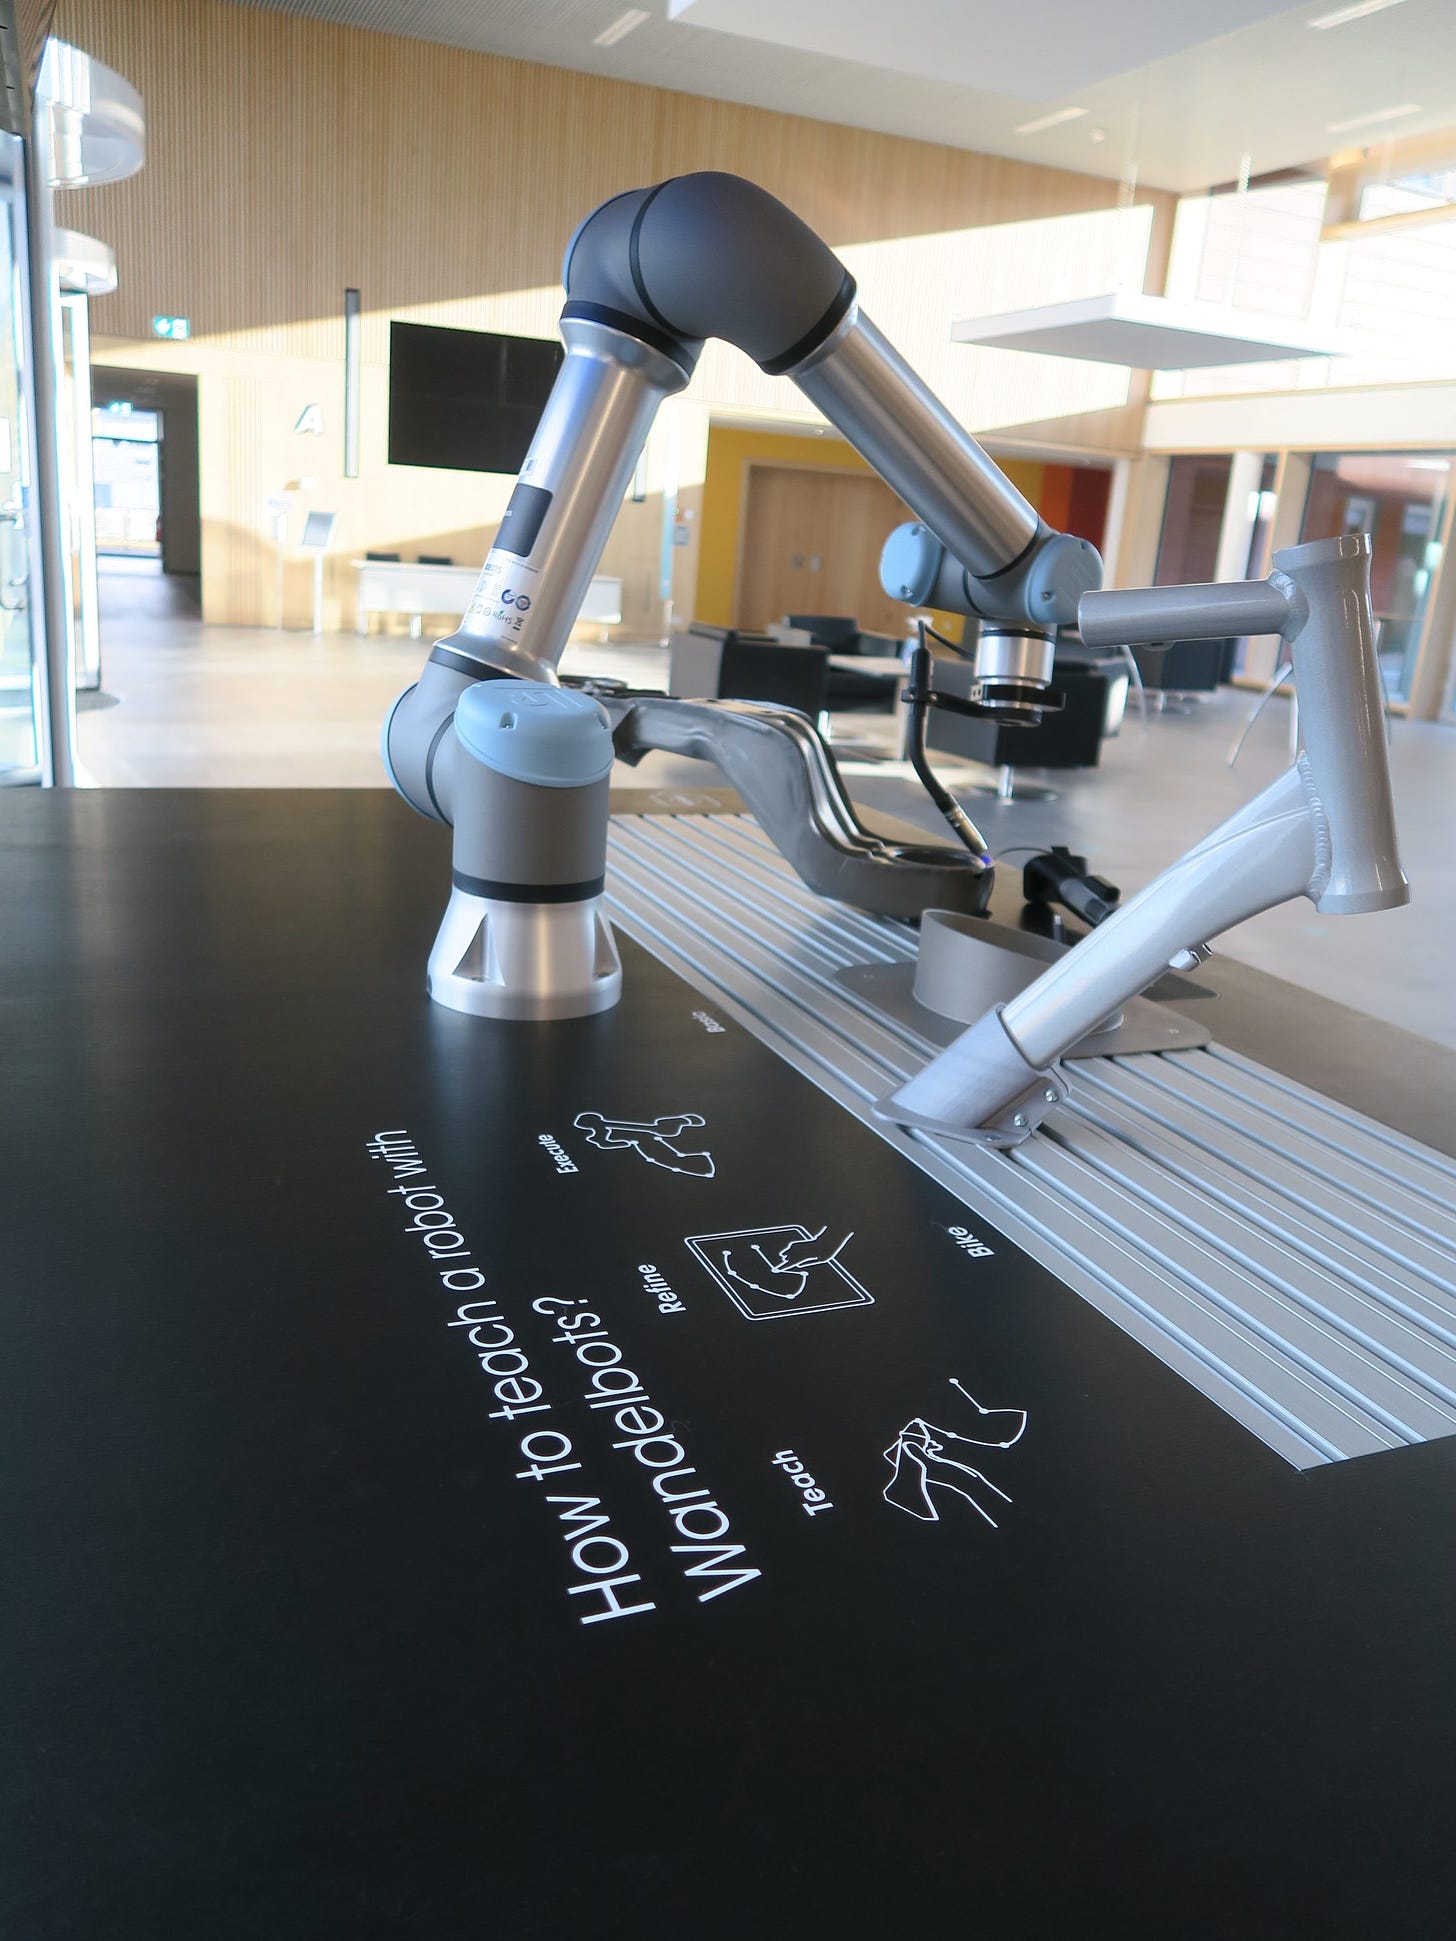 Dresden Chamber of Skilled Crafts demonstrates simple robot programming for craftspeople with Wandelbots Teaching